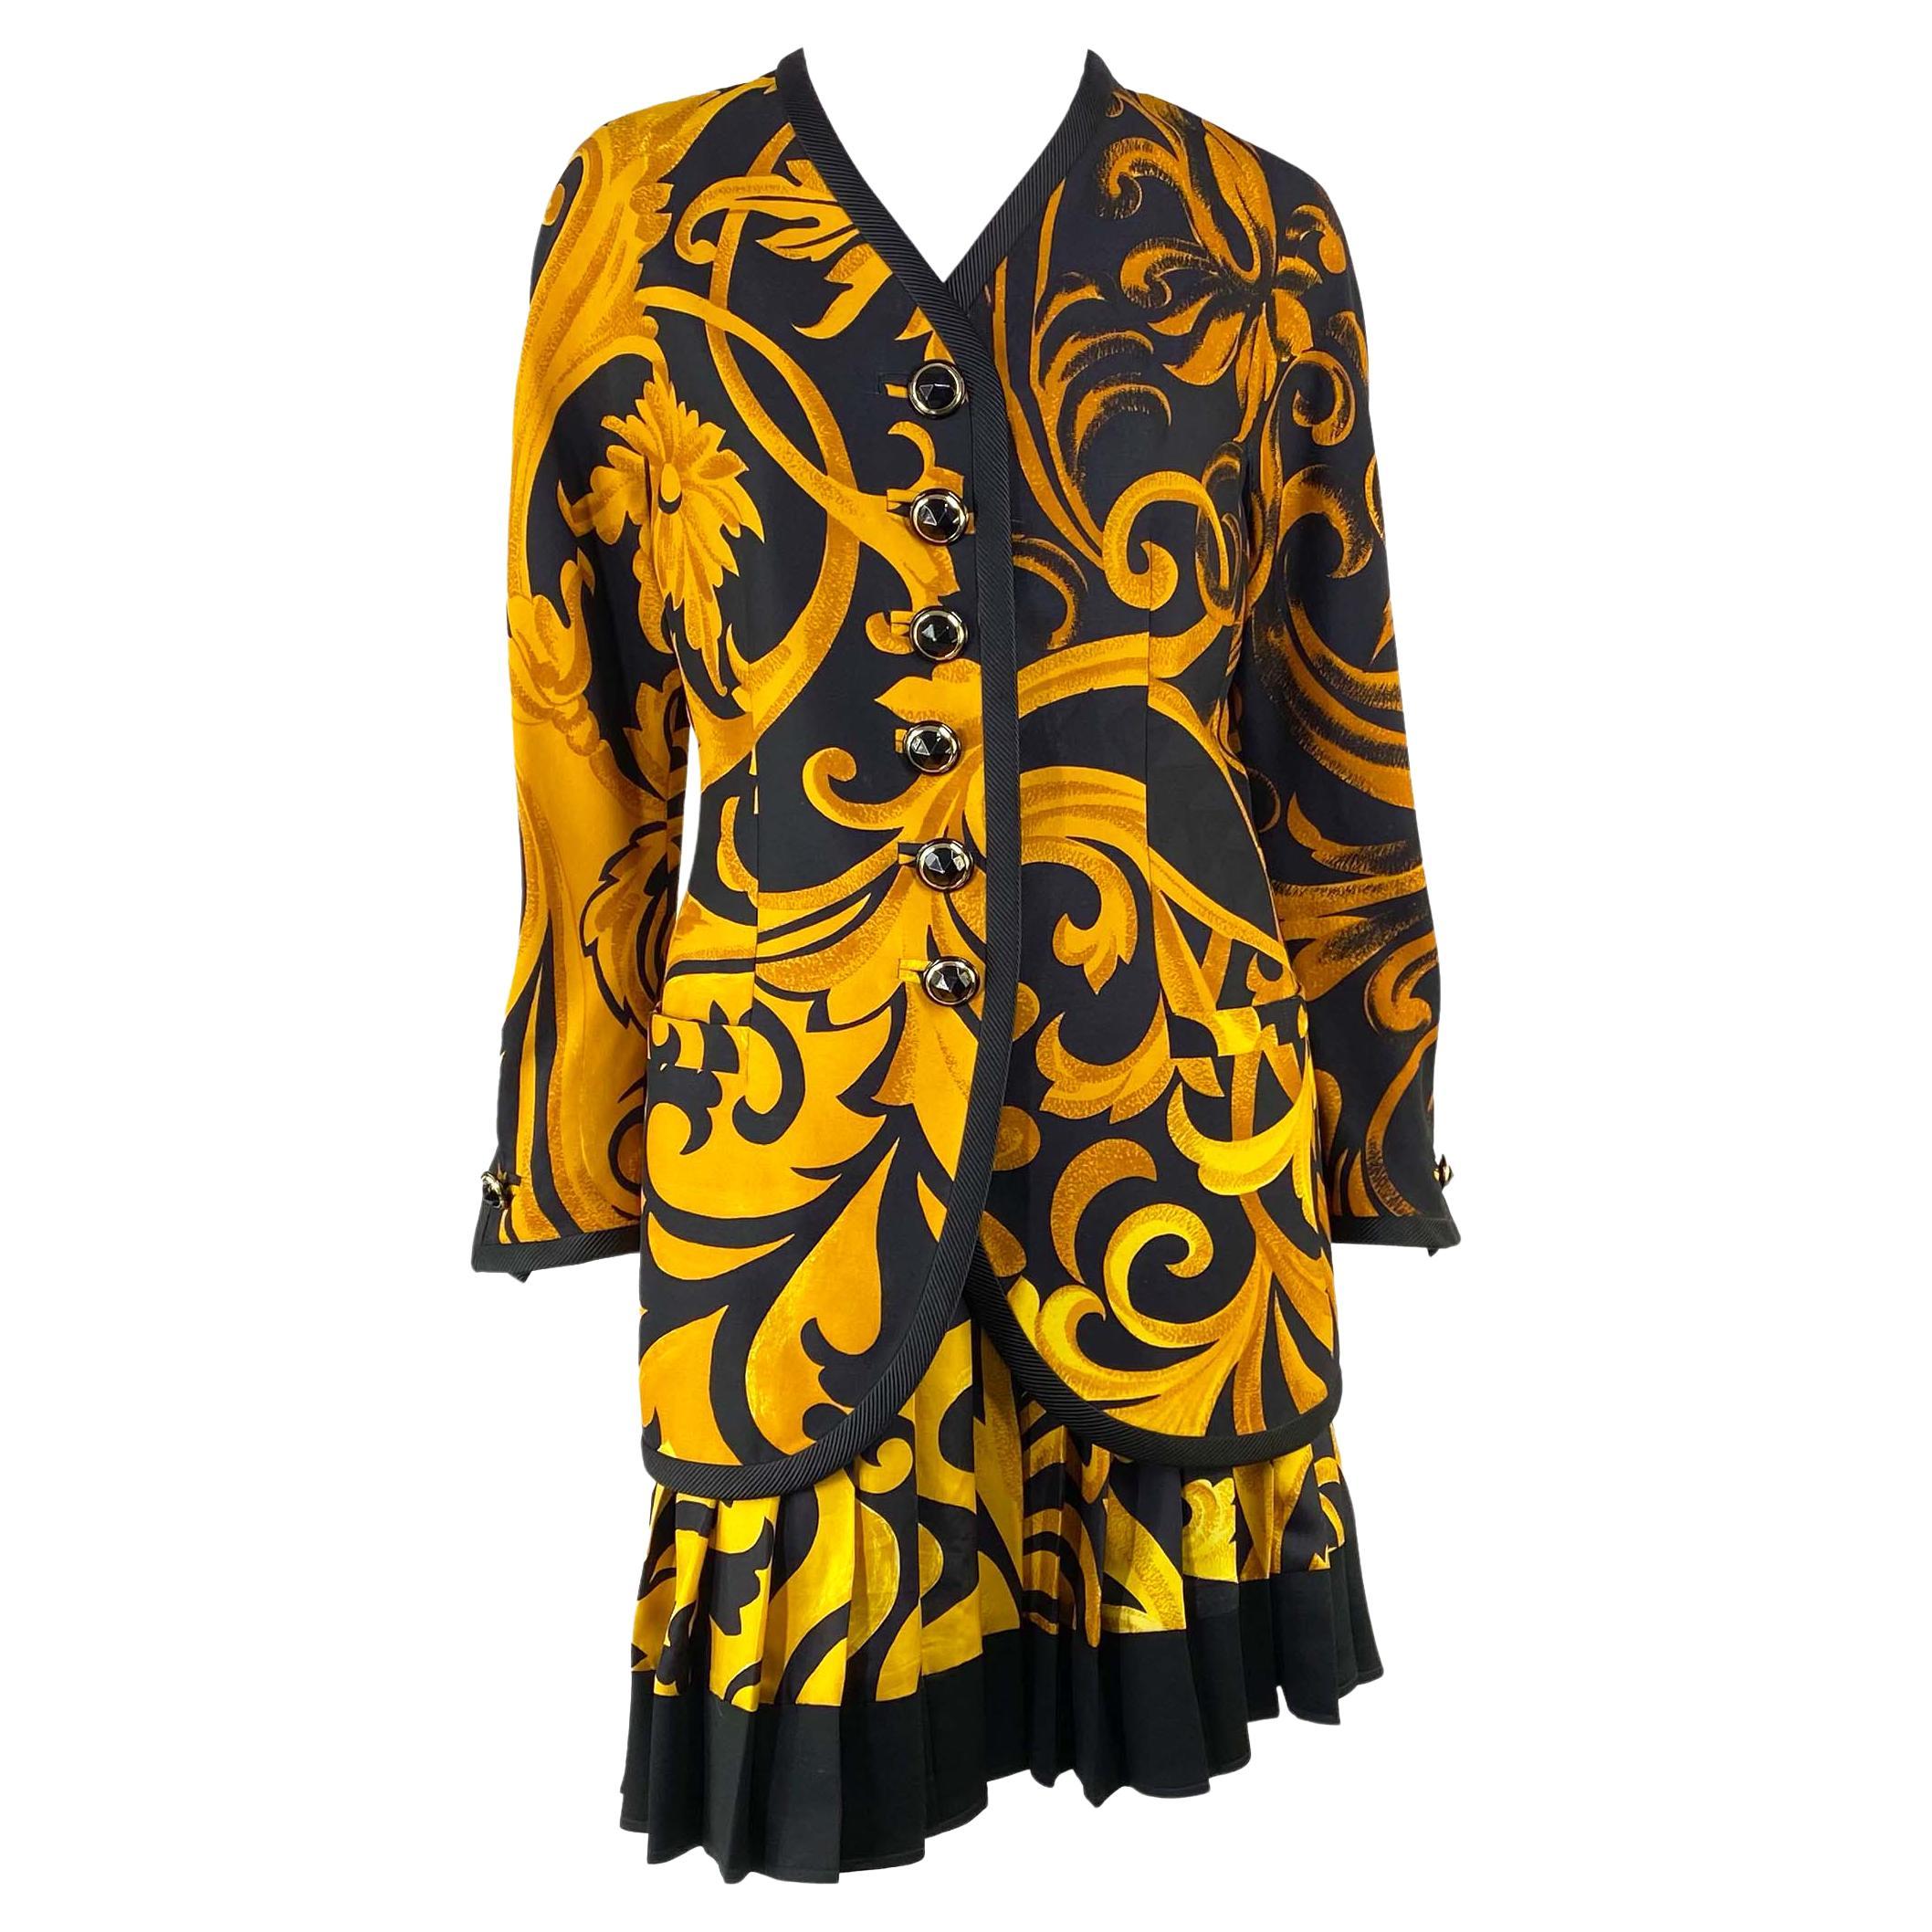 F/W 1991 Gianni Versace Couture Black Gold Baroque Print Silk Pleated Skirt Suit